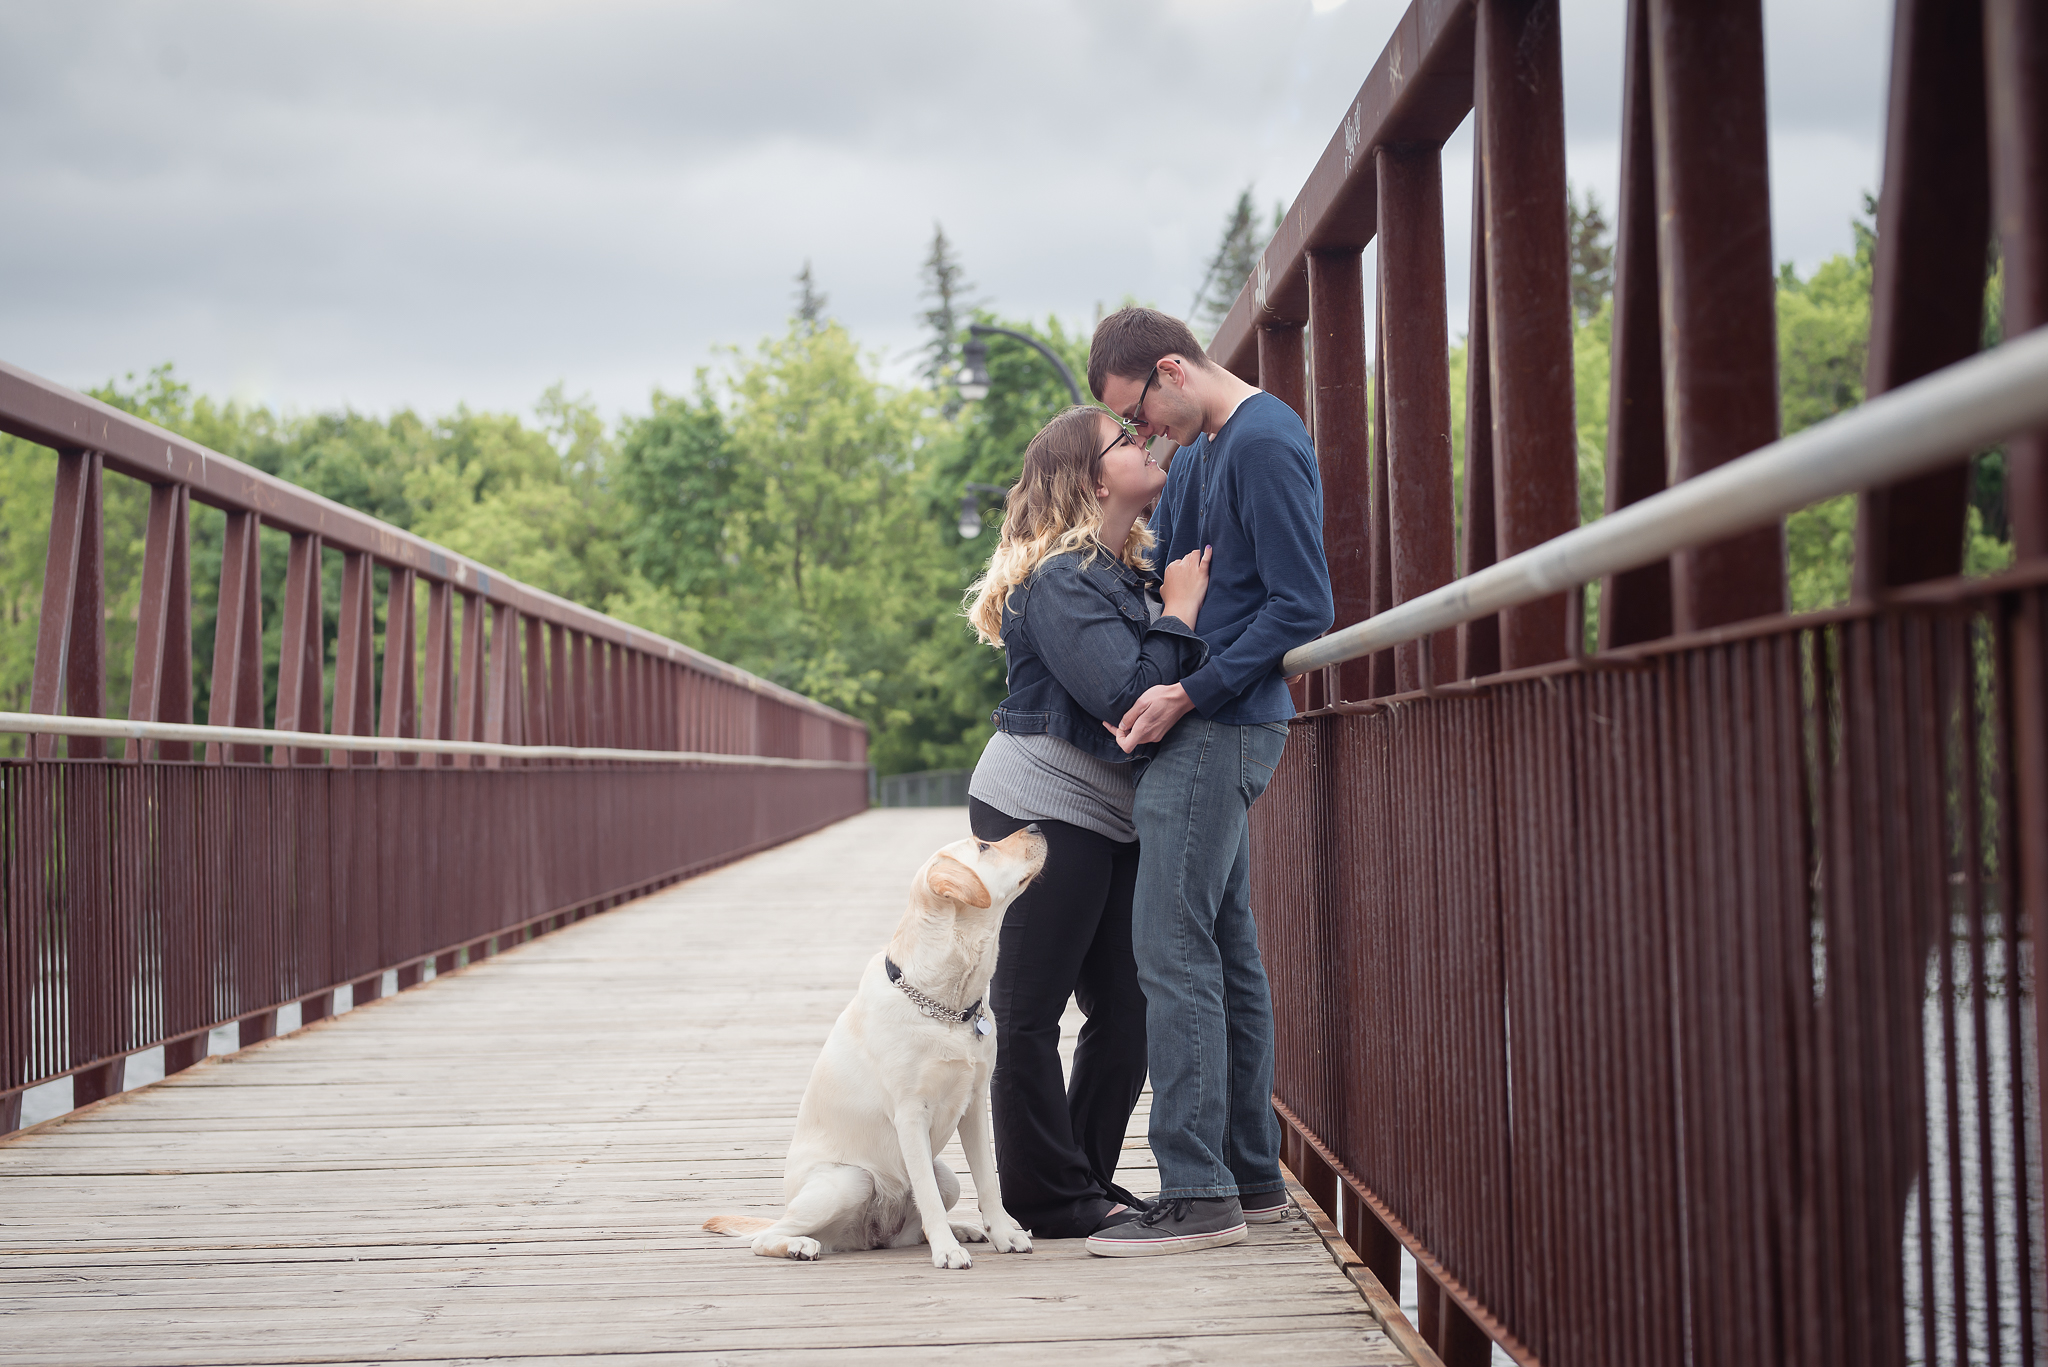 Couples136NaomiLuciennePhotography062018-2-Edit.jpg